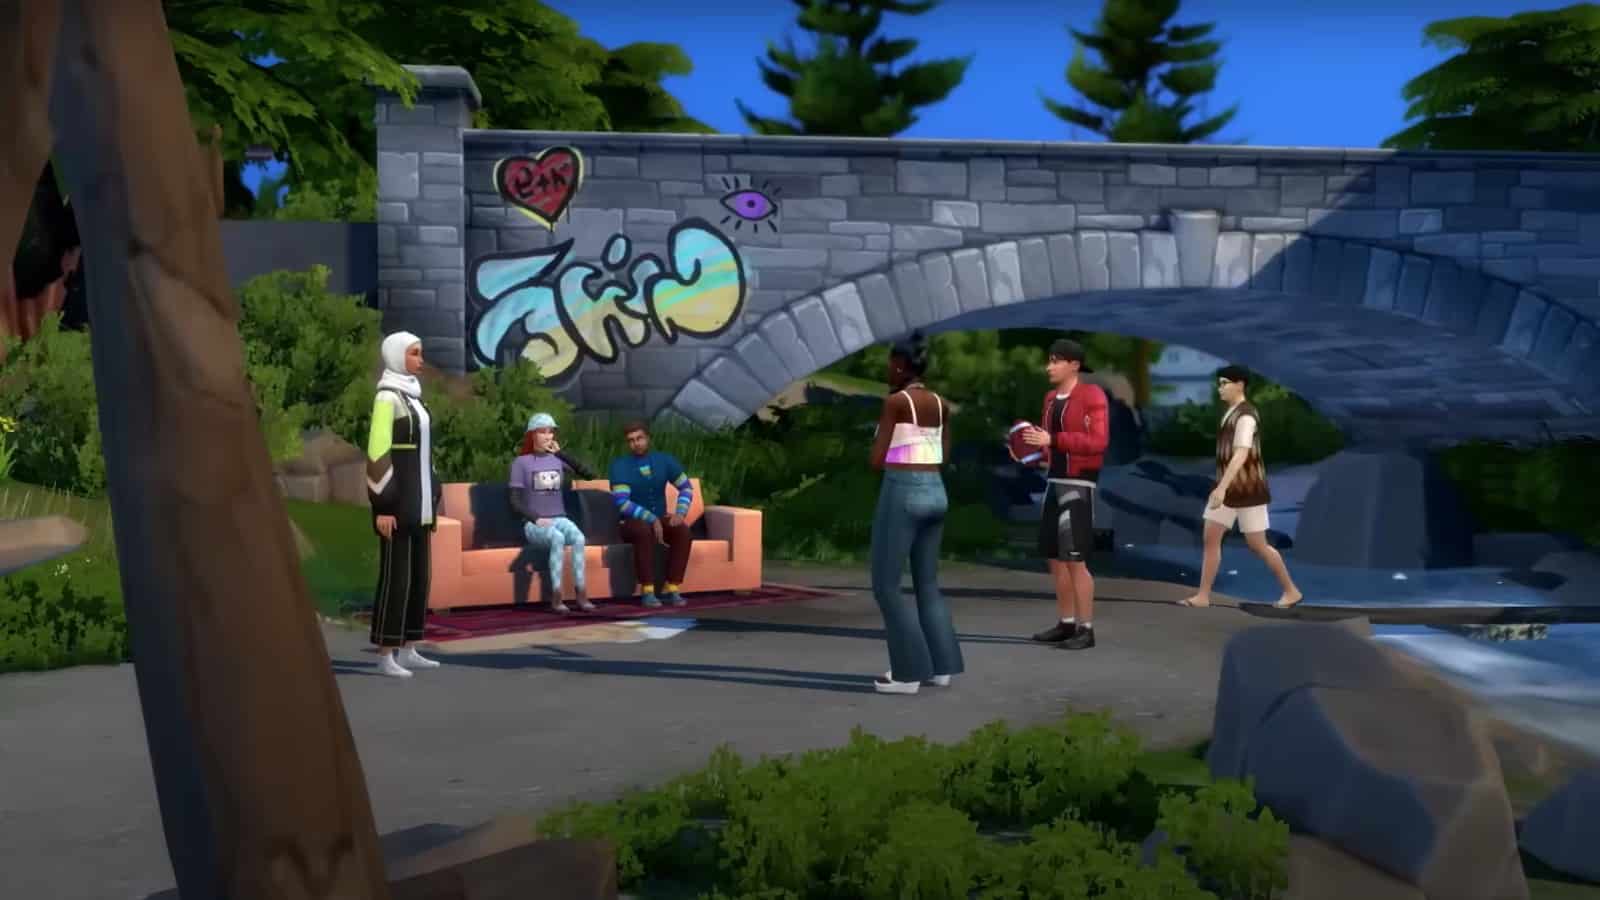 The Sims 4 High School Years screenshot featuring a group of student's on campus grounds.